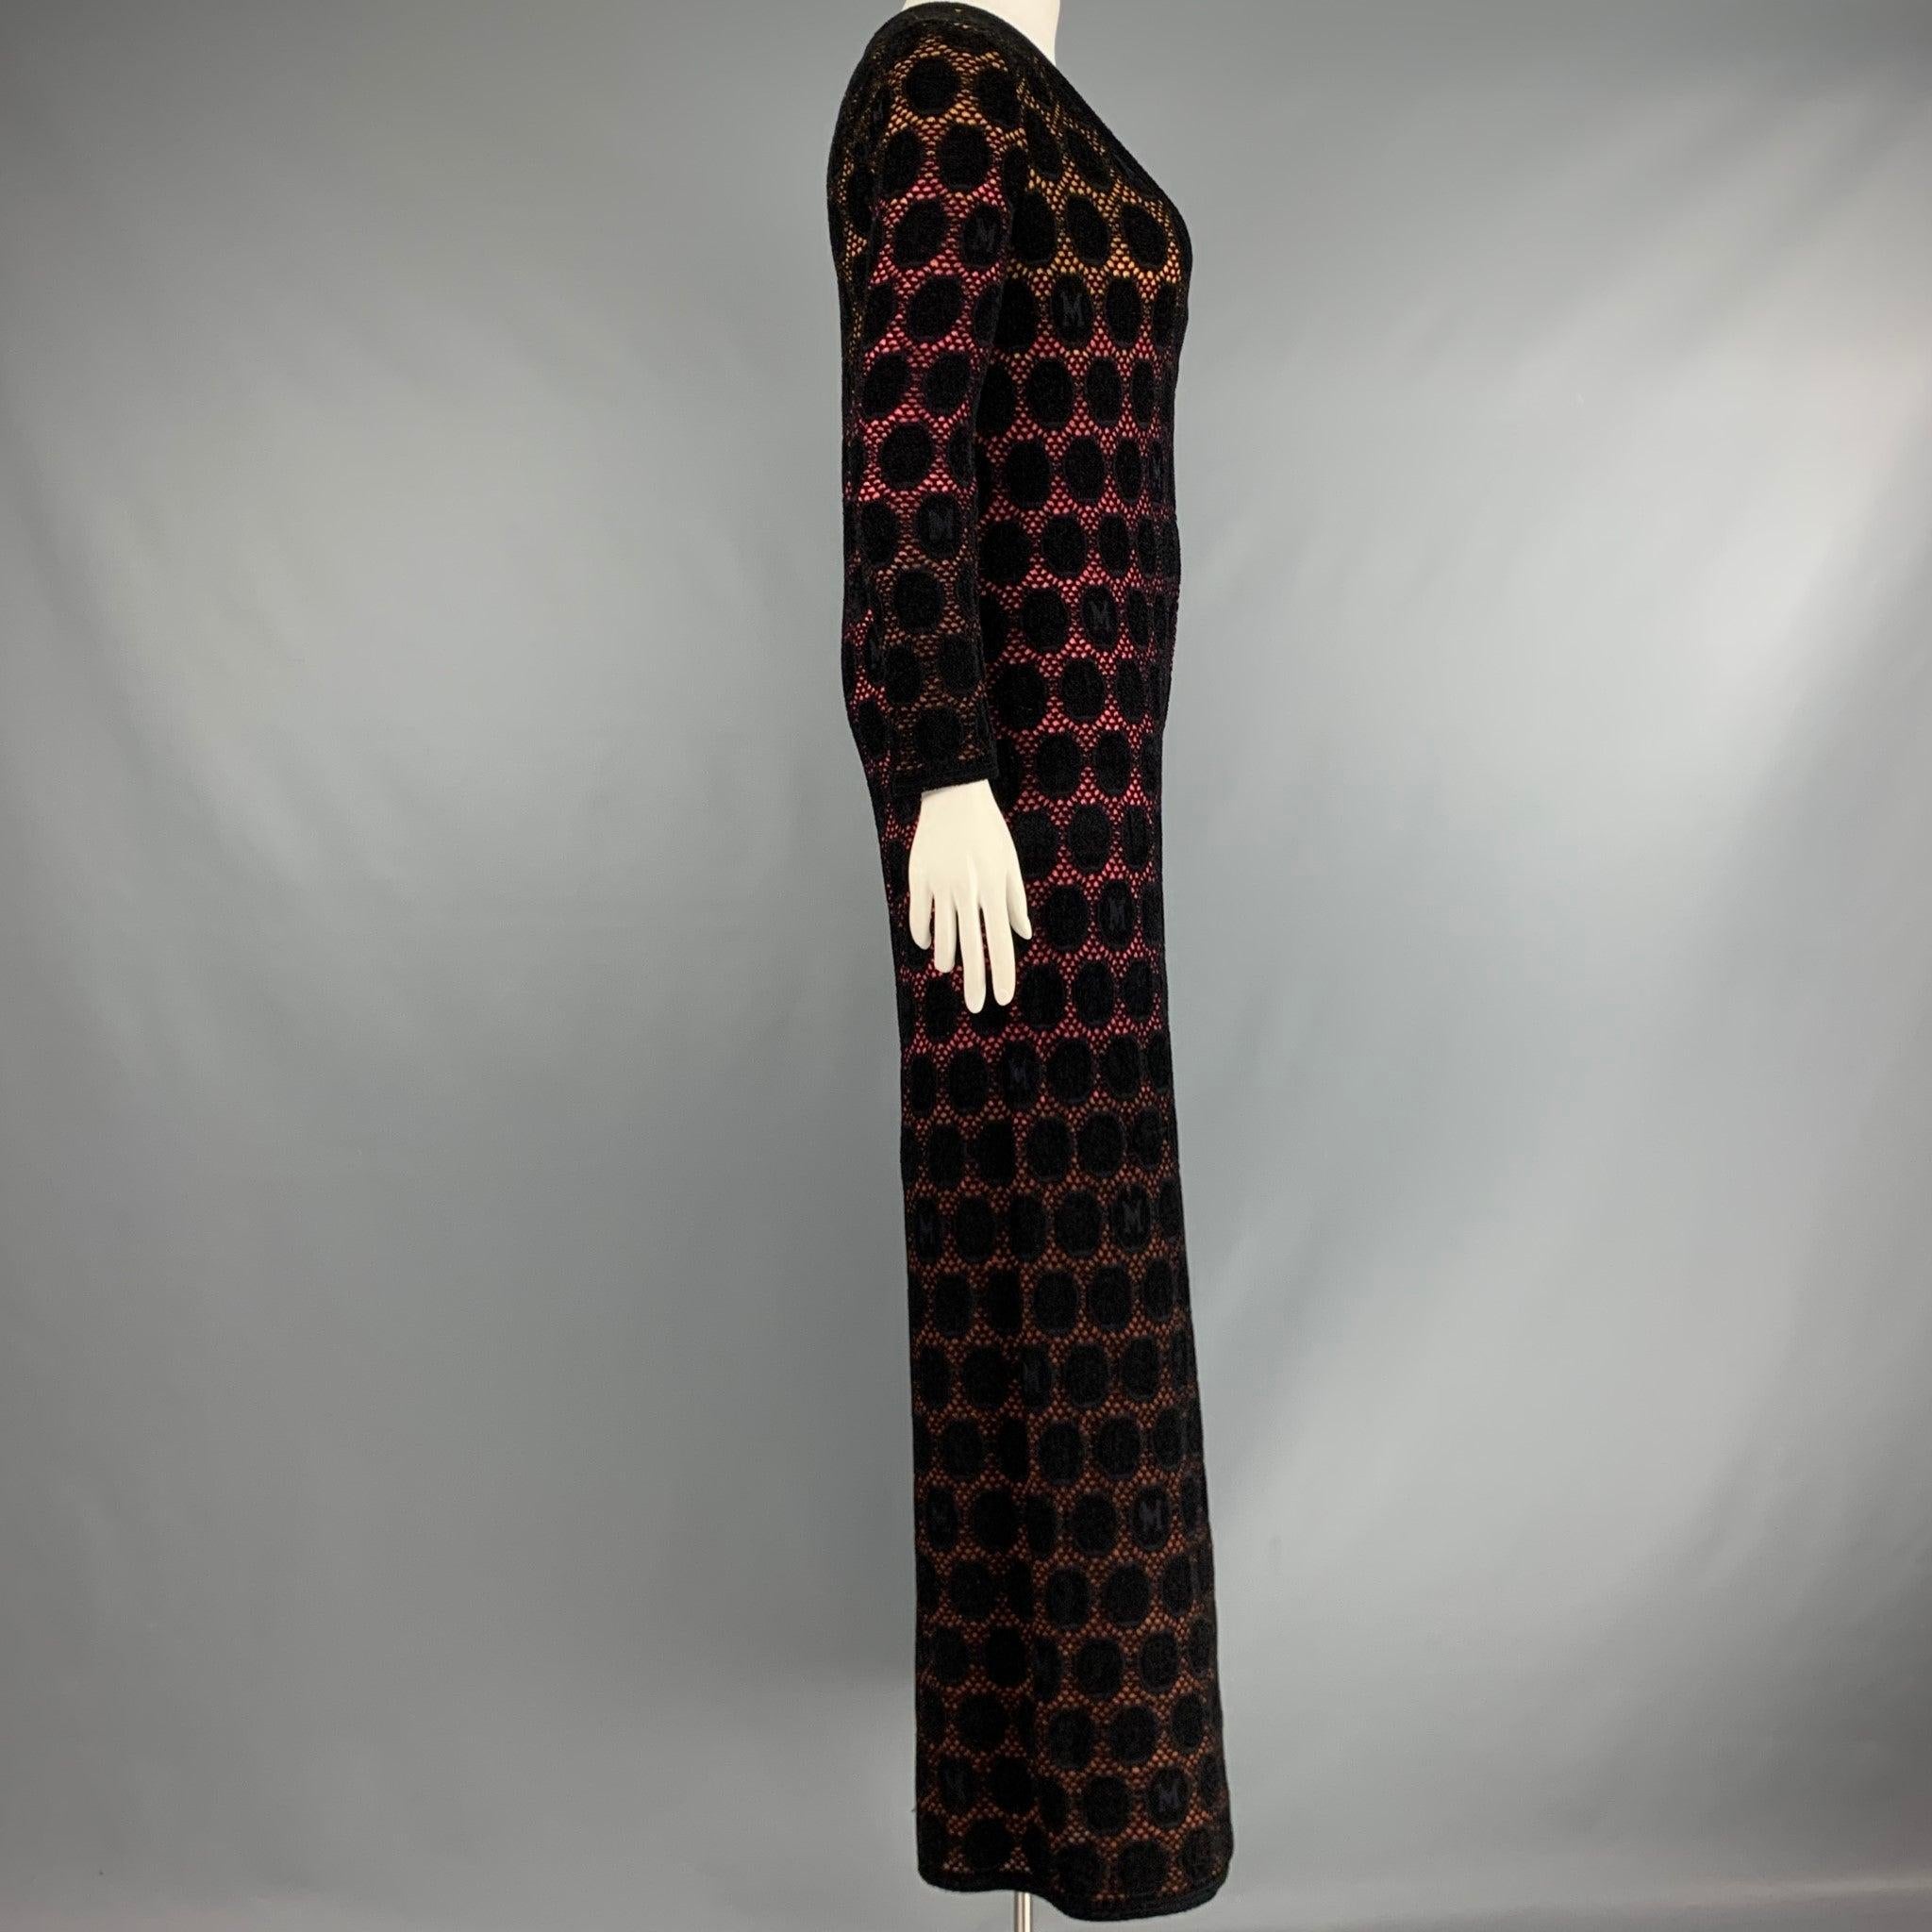 M MISSONI jumpsuit
in black knit fabric with yellow and pink ombre details featuring a wide leg style, and V-neck. Made in Italy.Excellent Pre-Owned Condition. Minor signs of wear. 

Marked:   size not marked. 

Measurements: 
  
Shoulder: 15 inches